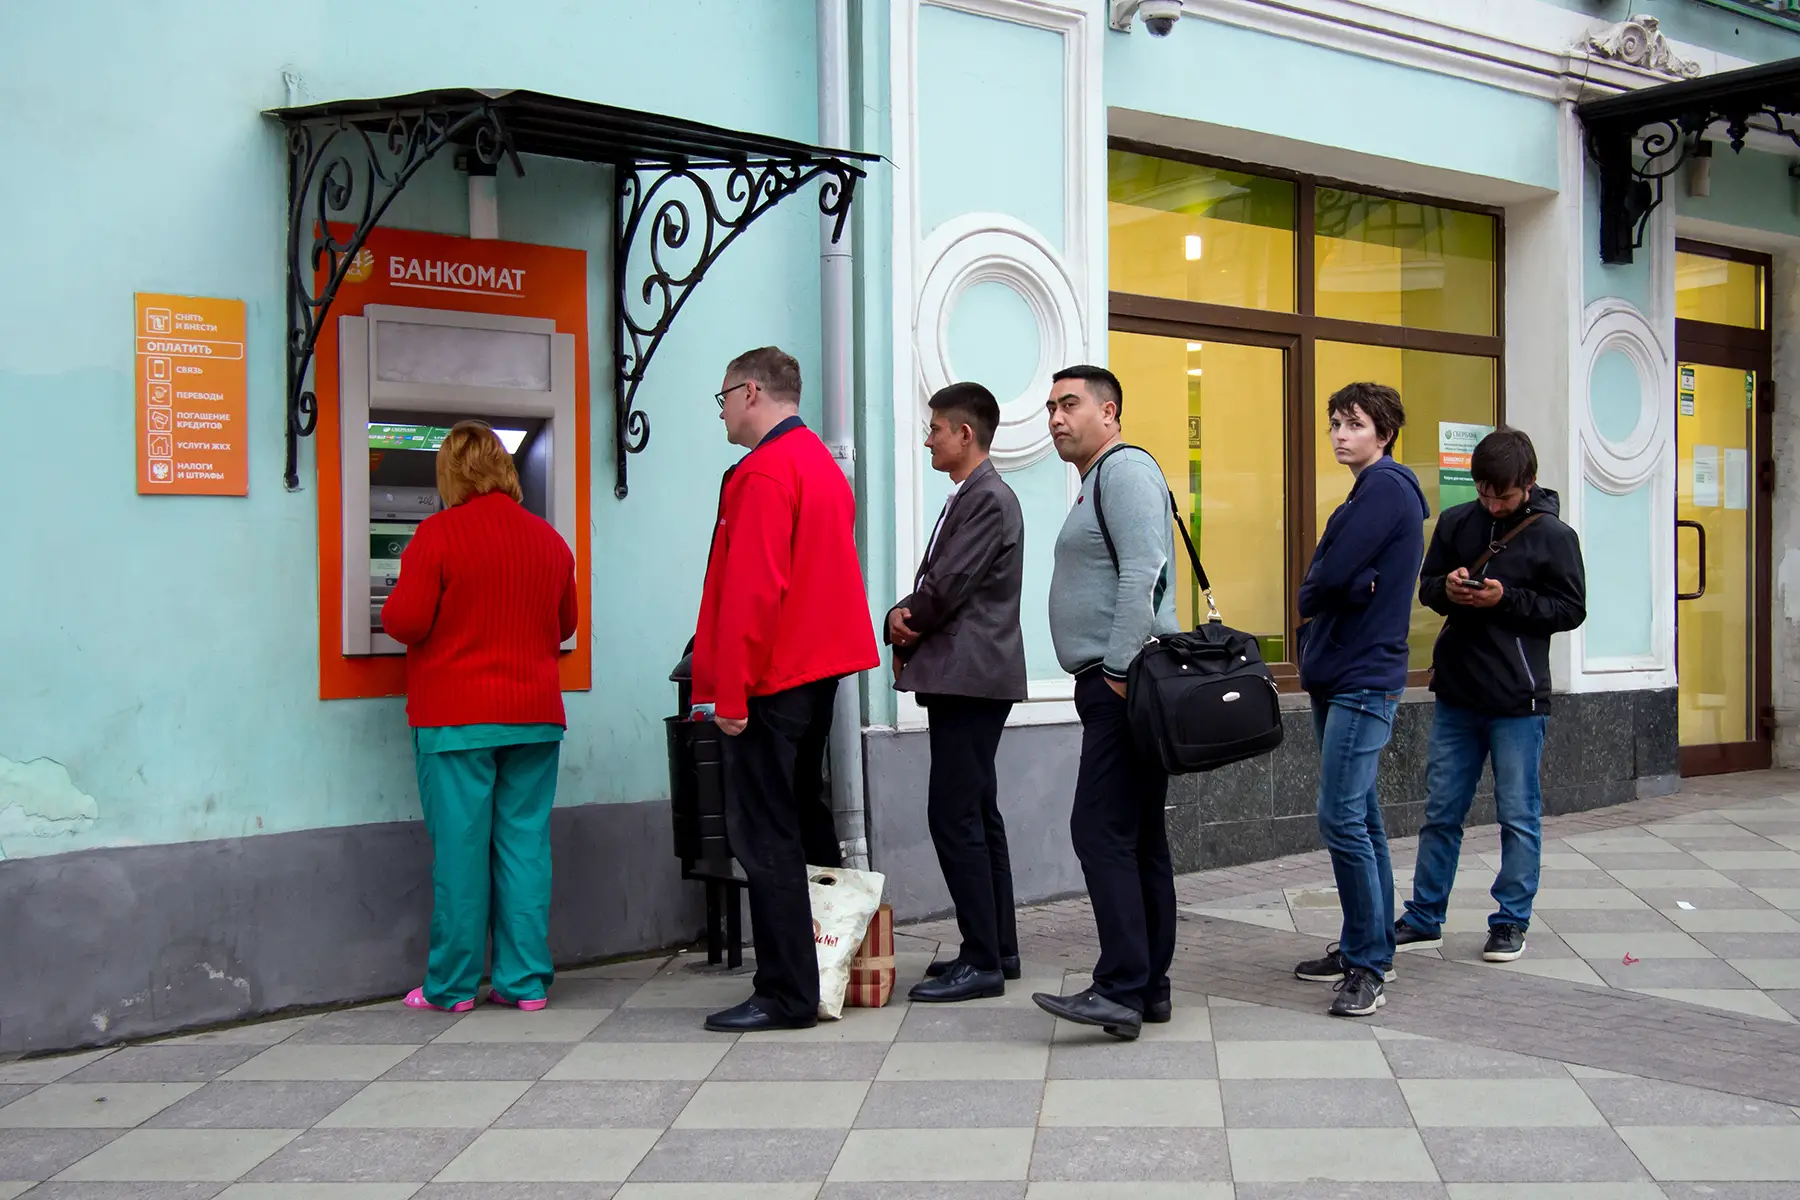 Customers queueing at an ATM in Moscow, Russia